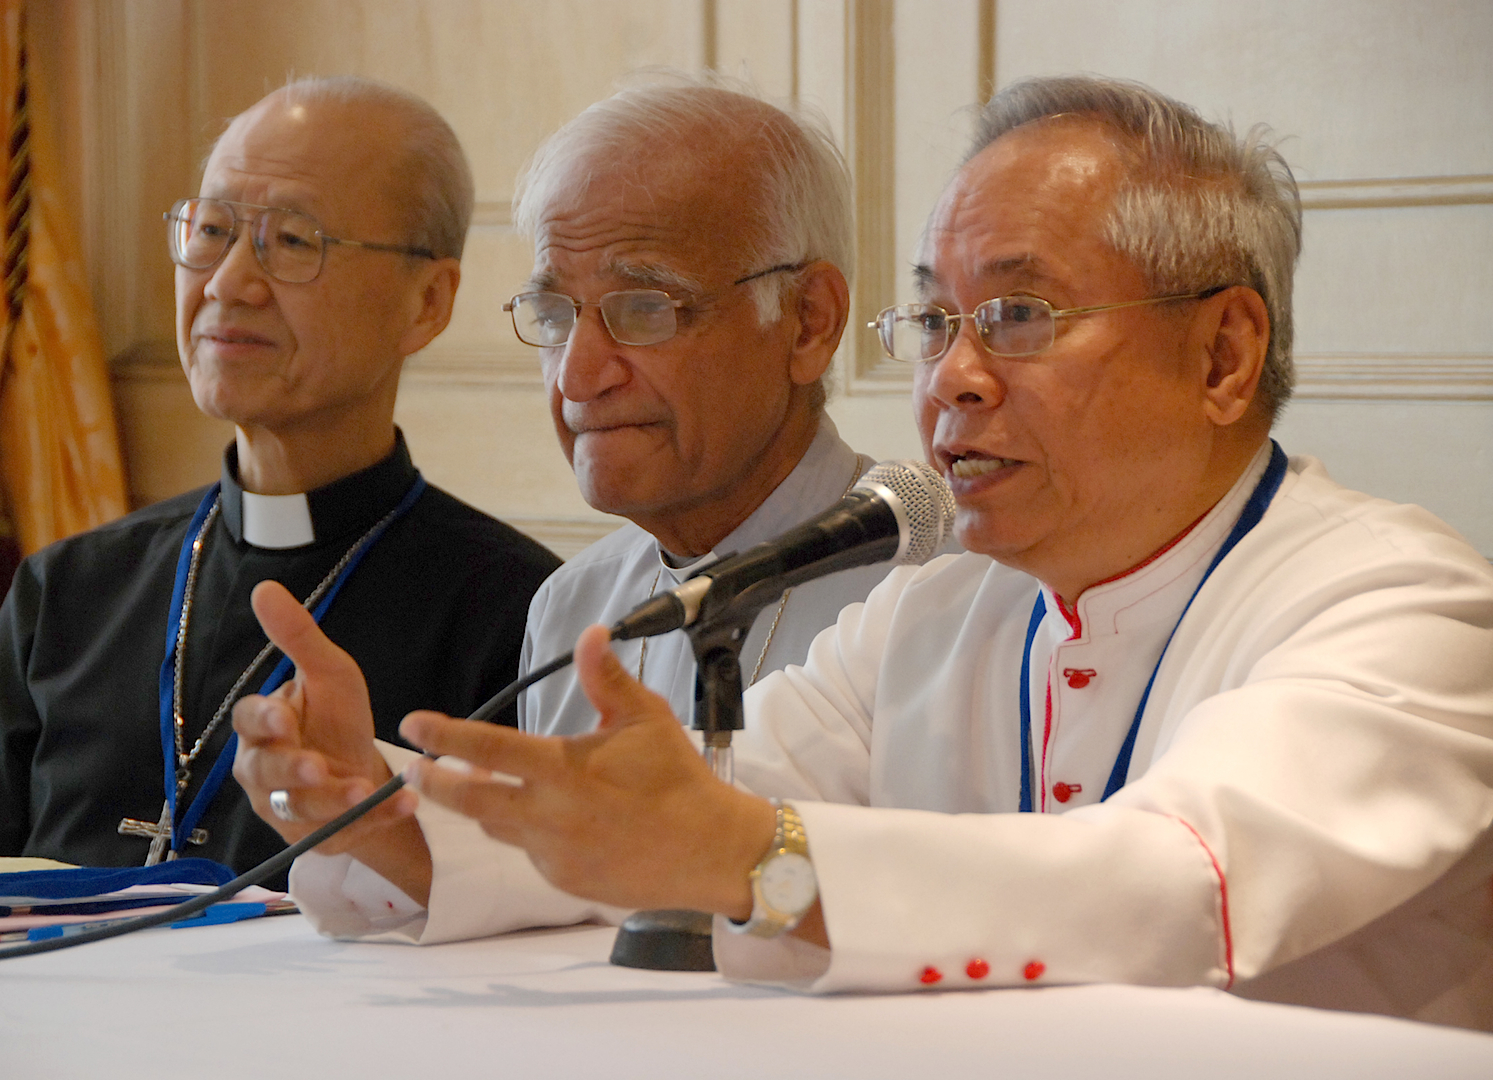 Cardinal-designate Orlando Quevedo addresses a press conference for the 9th Federation of Asian Bishops' Conferences plenary assembly in 2009 in Manila. Pakistan Archbishop Lawrence John Saldanha of Lahore and now-Cardinal John Tong Hon of Hong Kong look on. (Roy Lagarde)